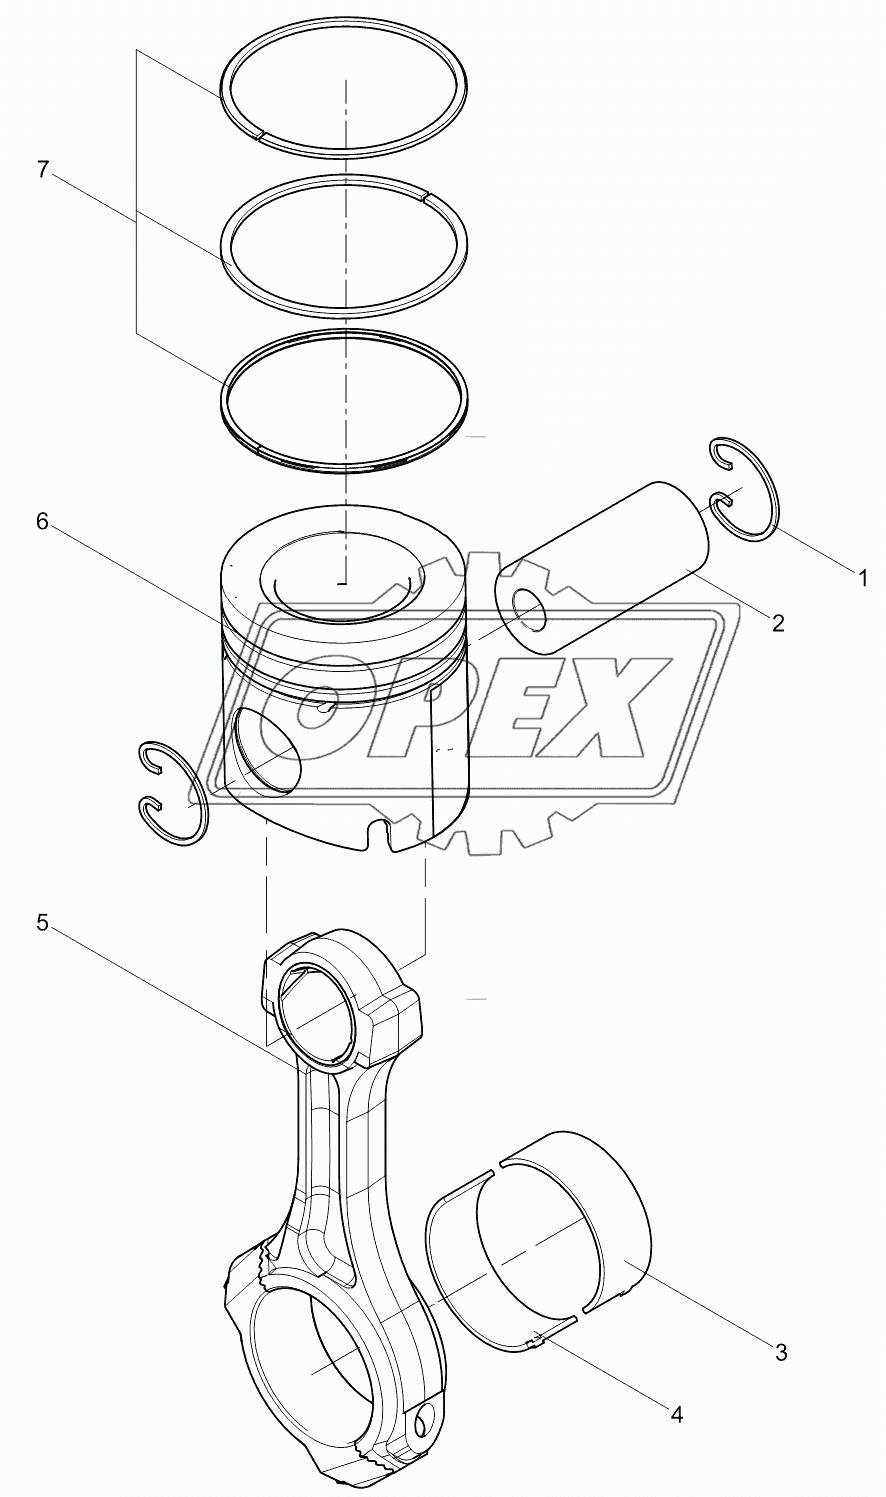 Piston and Connecting Rod Group